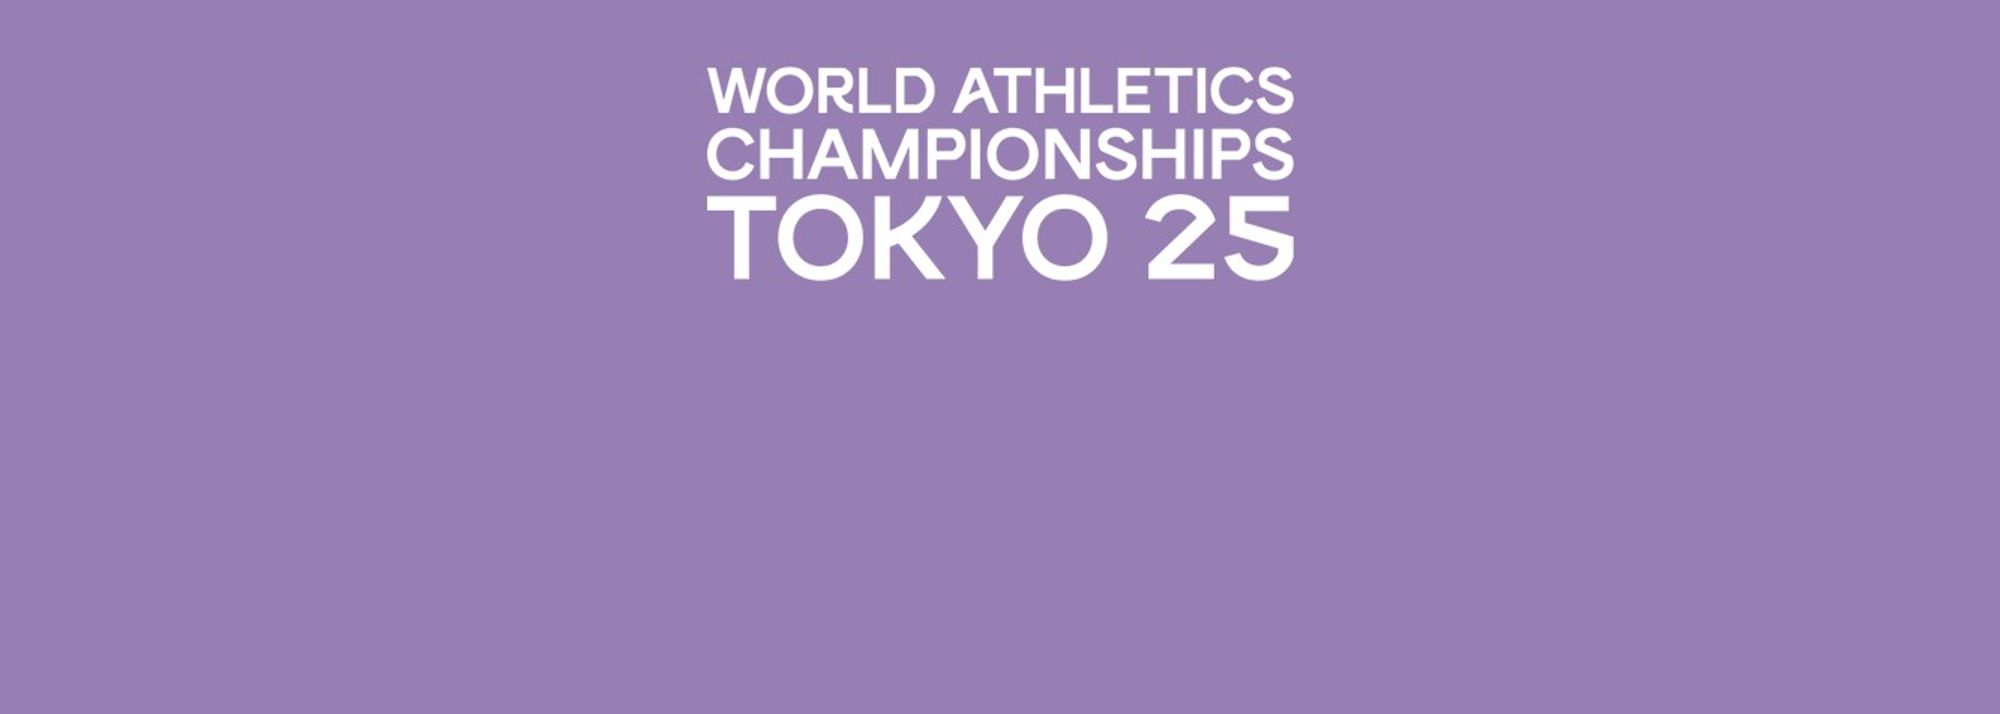 The Tokyo 25 is calling for sponsors to support the World  Athletics Championships Tokyo 25